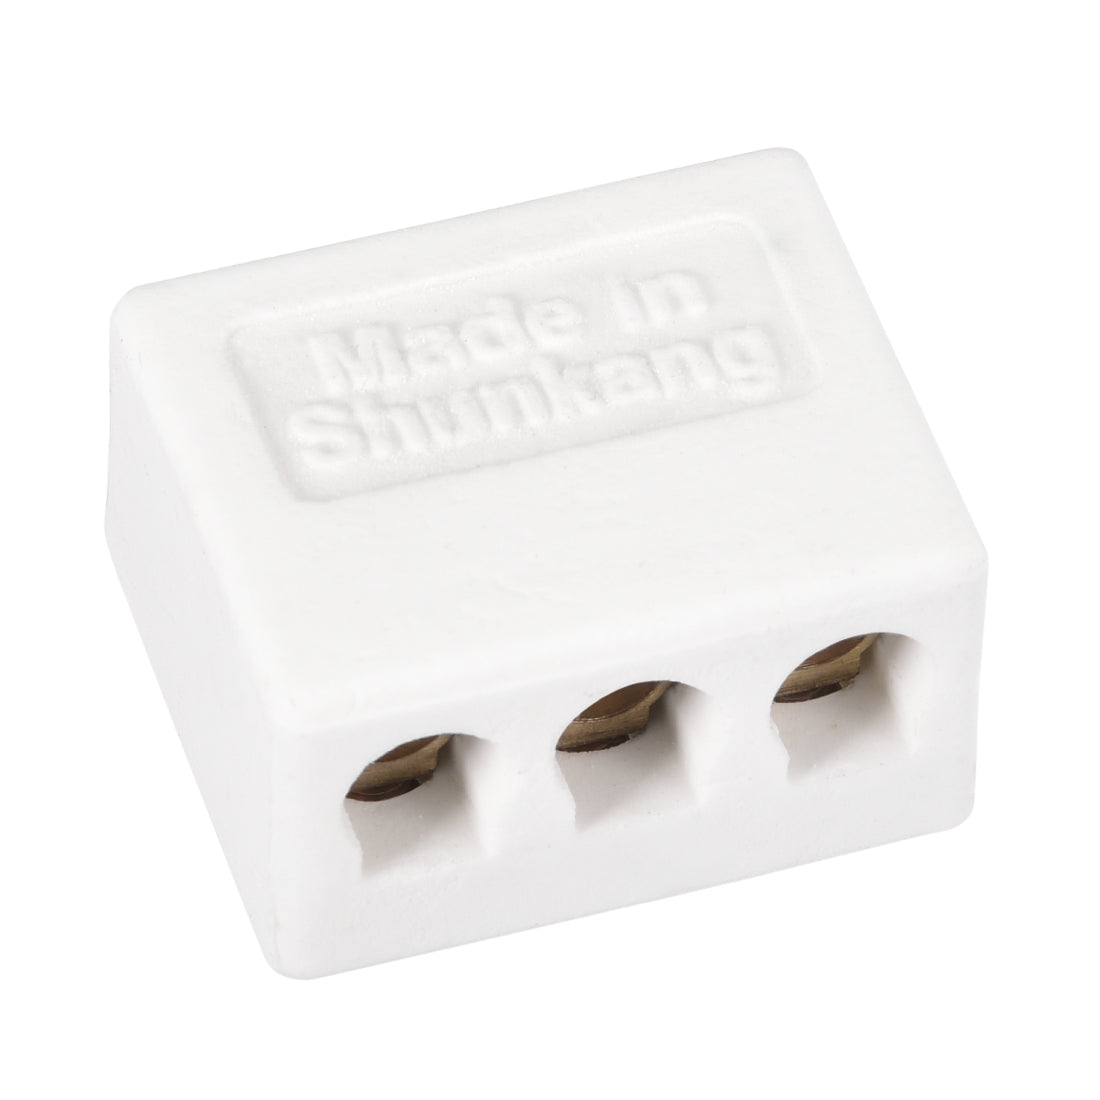 uxcell Uxcell 3 Way Ceramics Terminal Blocks High Temp Porcelain Ceramic Connectors 36x30x20mm for Electrical Wire Cable